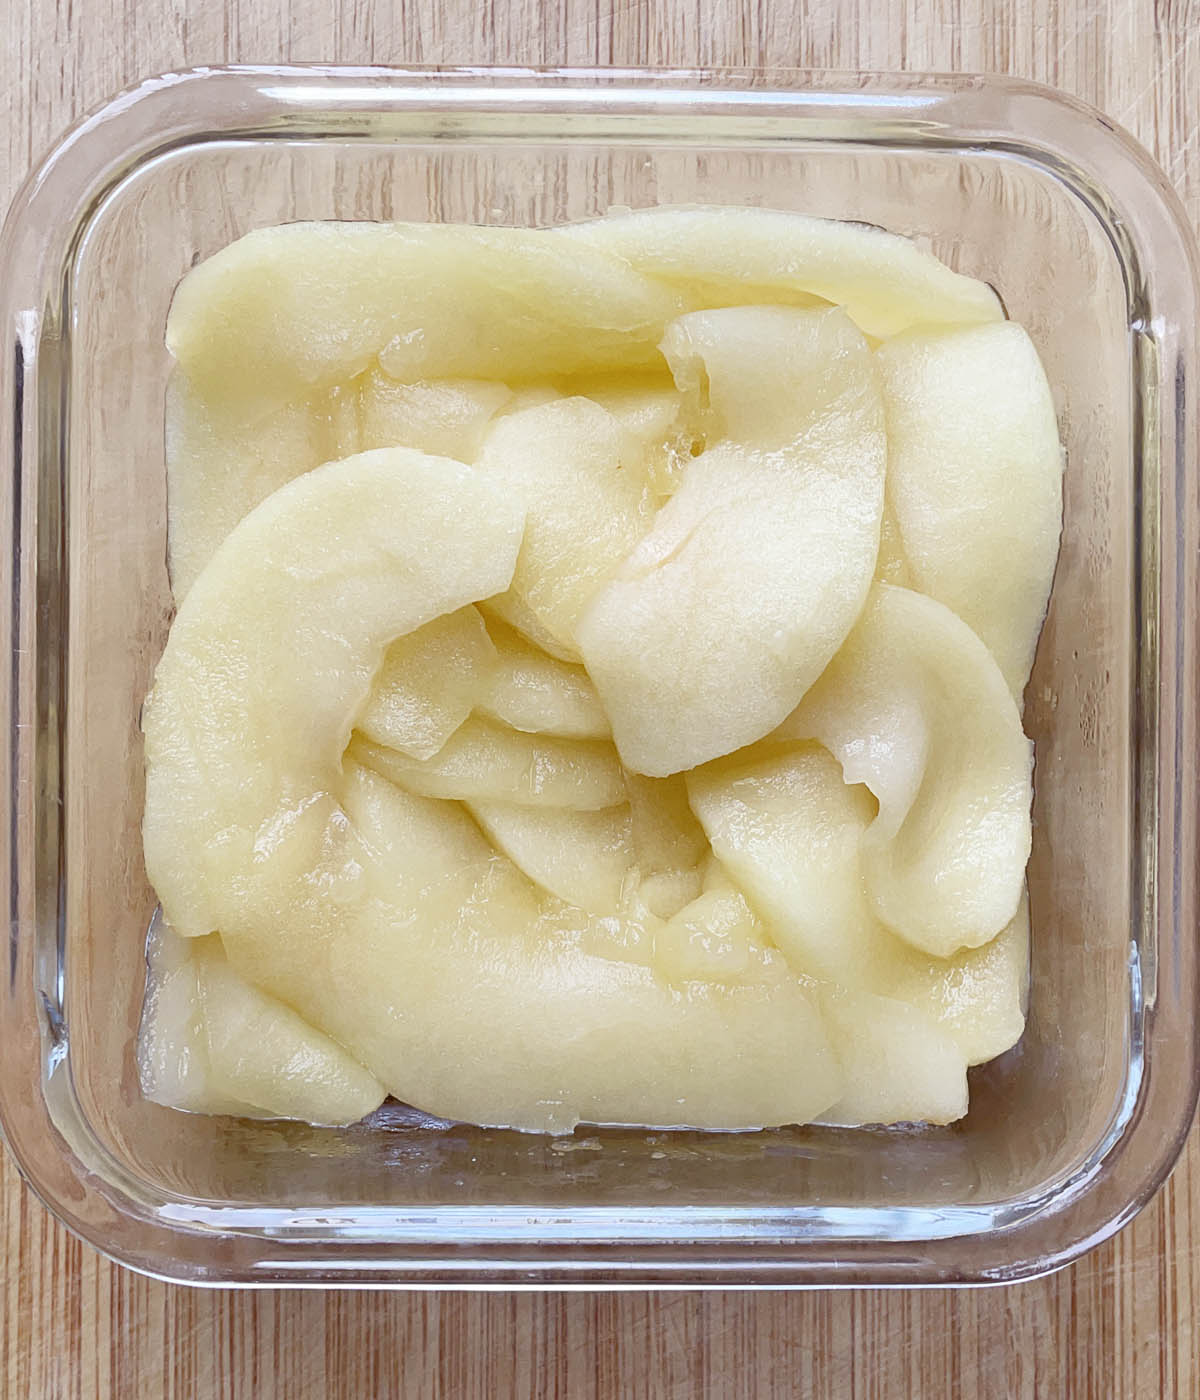 Cooked apple slices packed in a square glass container.